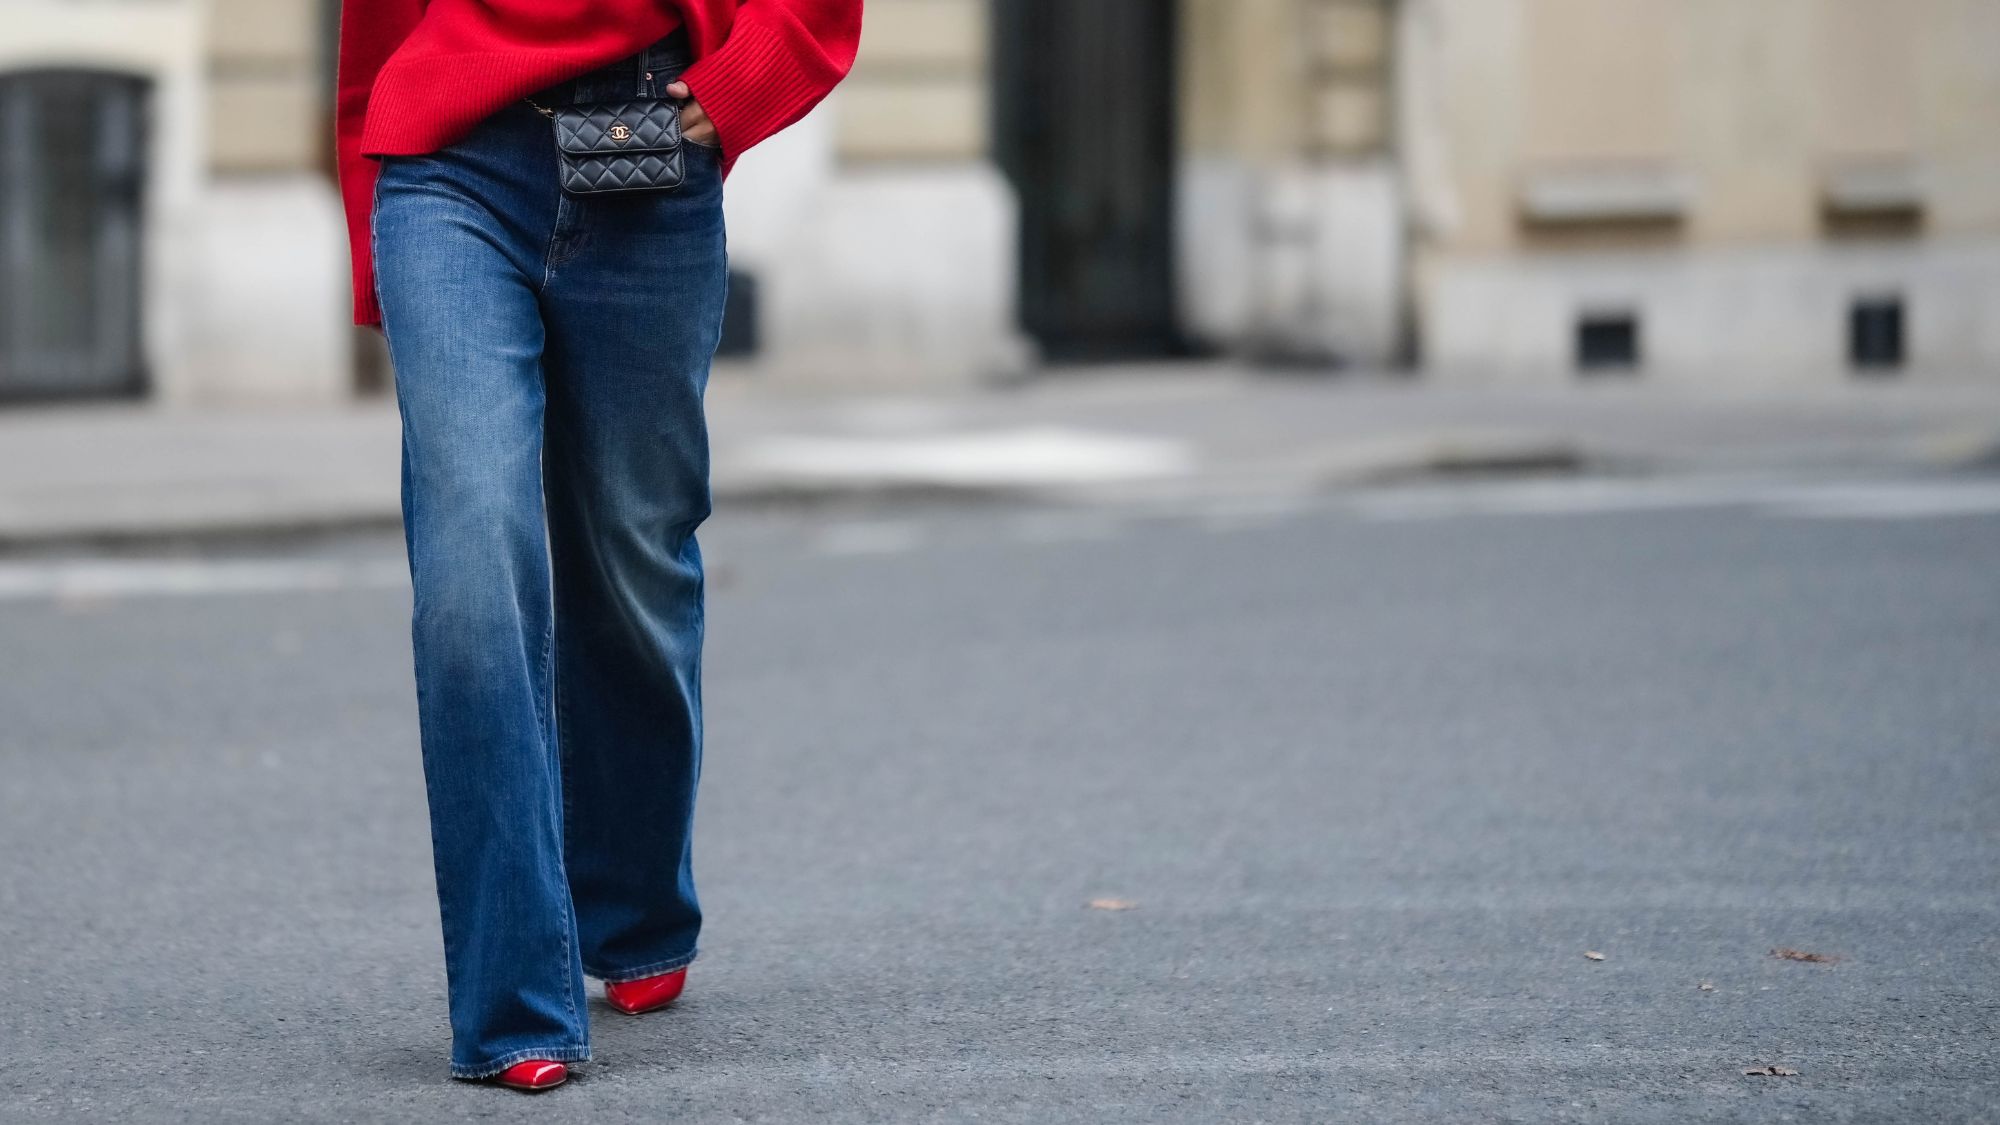 French Women Love the High-Rise Wide-Leg Jeans Trend